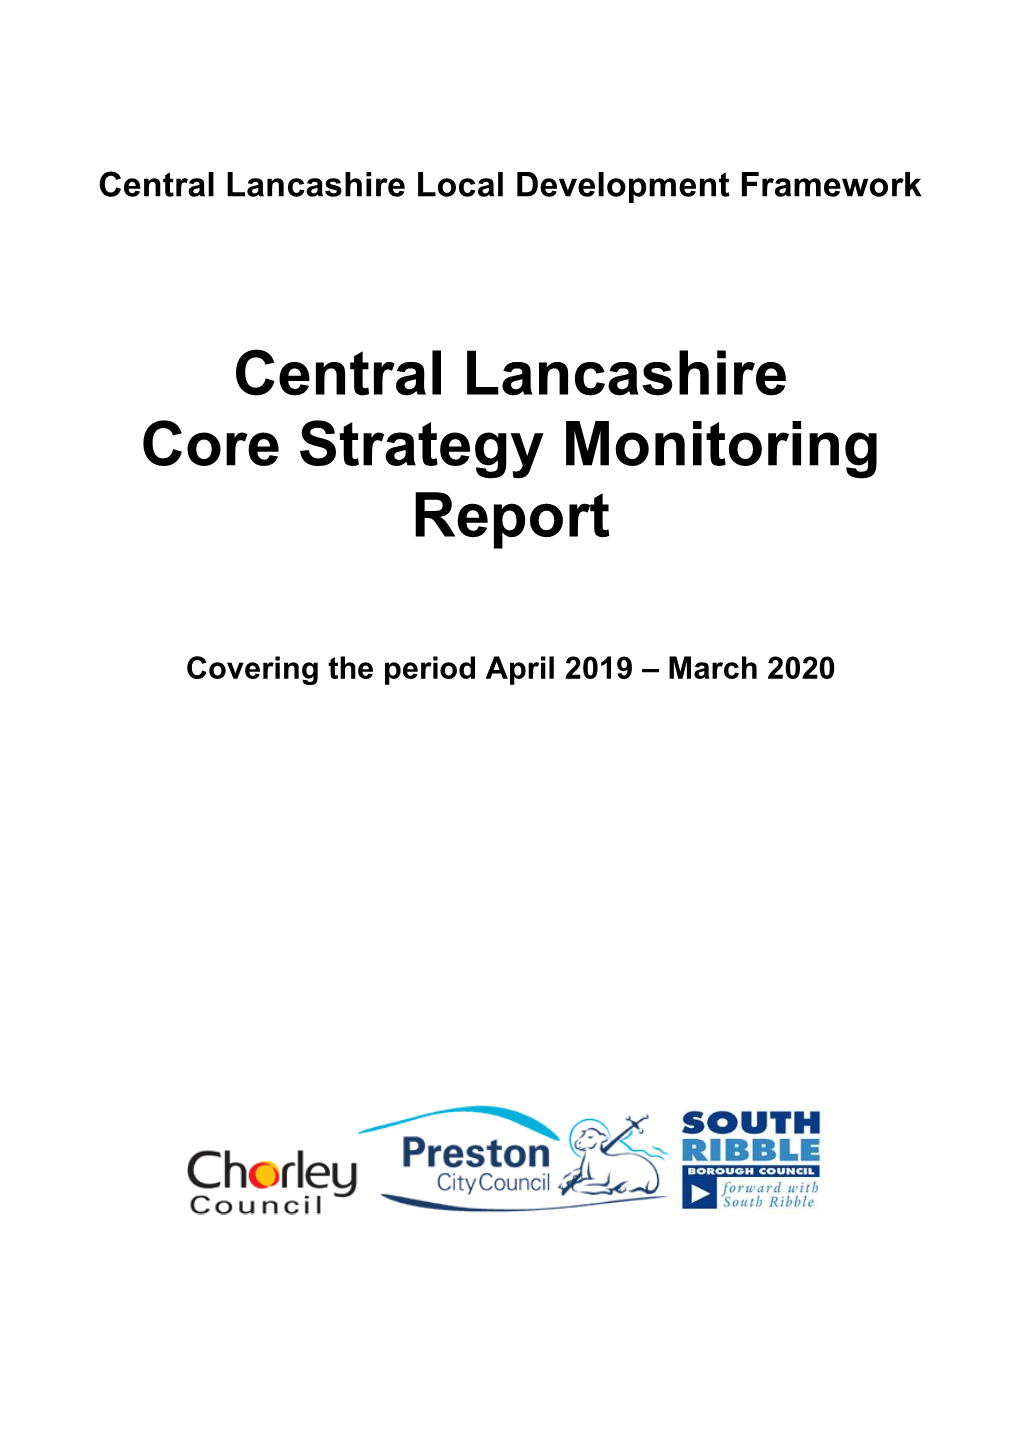 Central Lancashire Core Strategy Monitoring Report